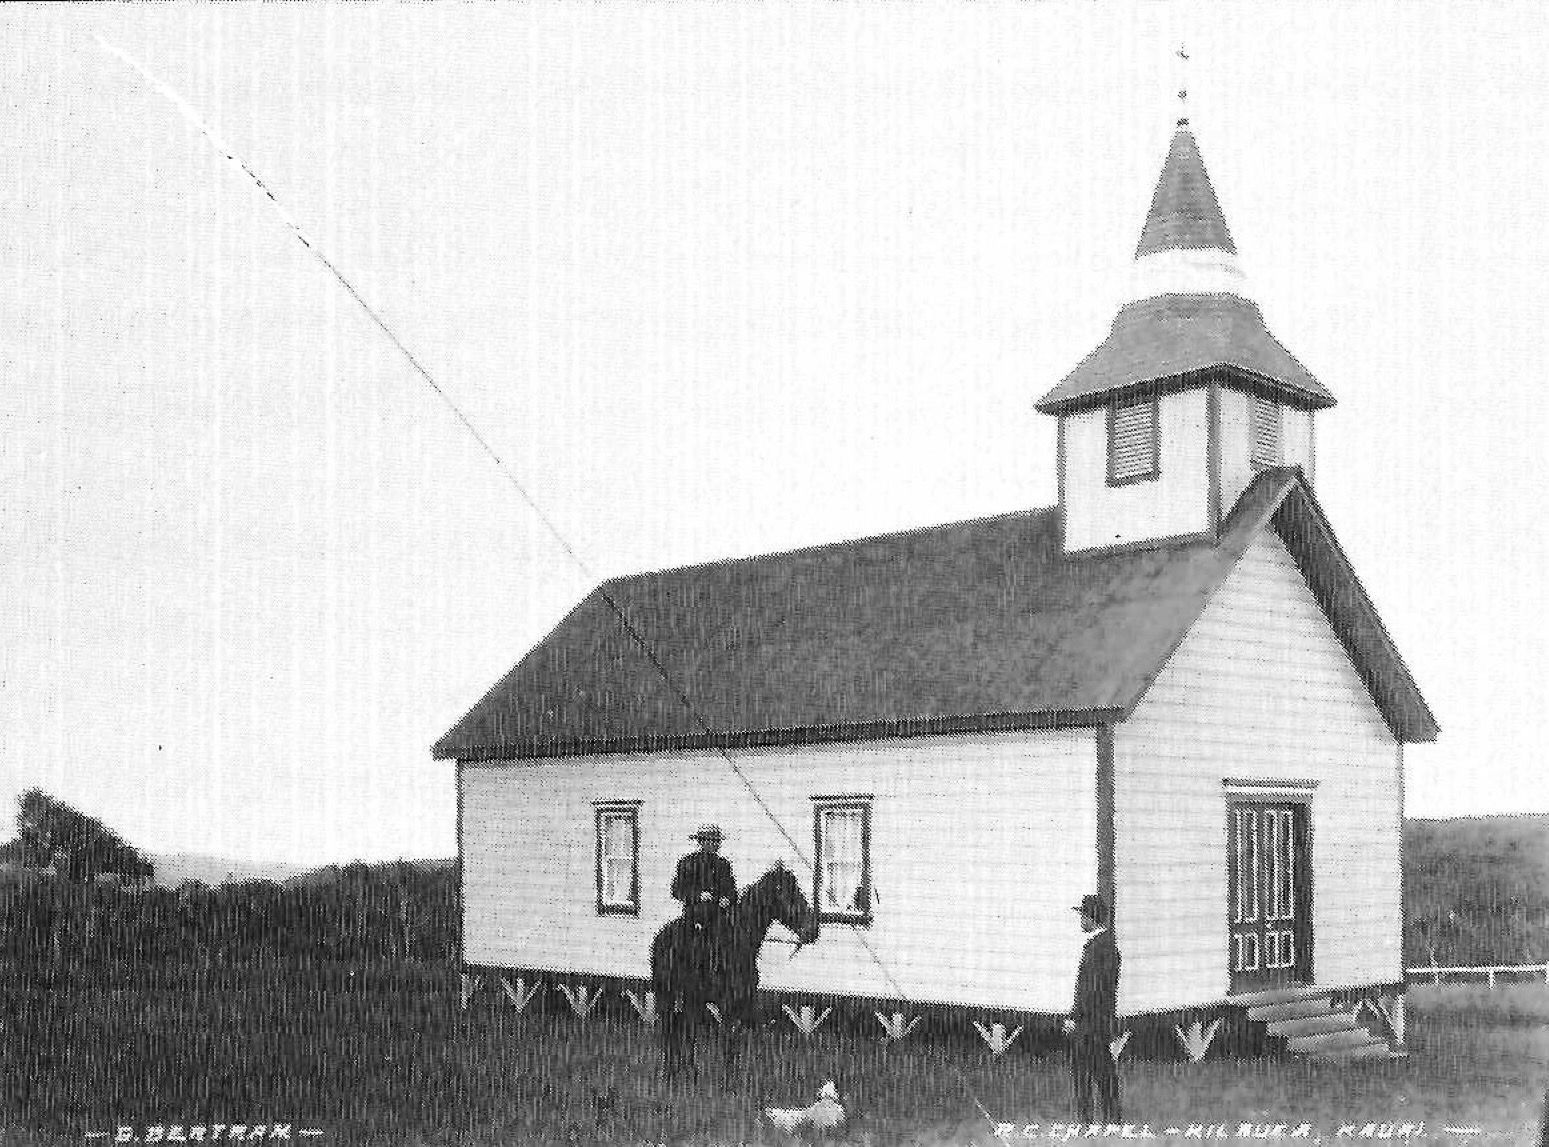 Black and white photo of original St. Sylvester church